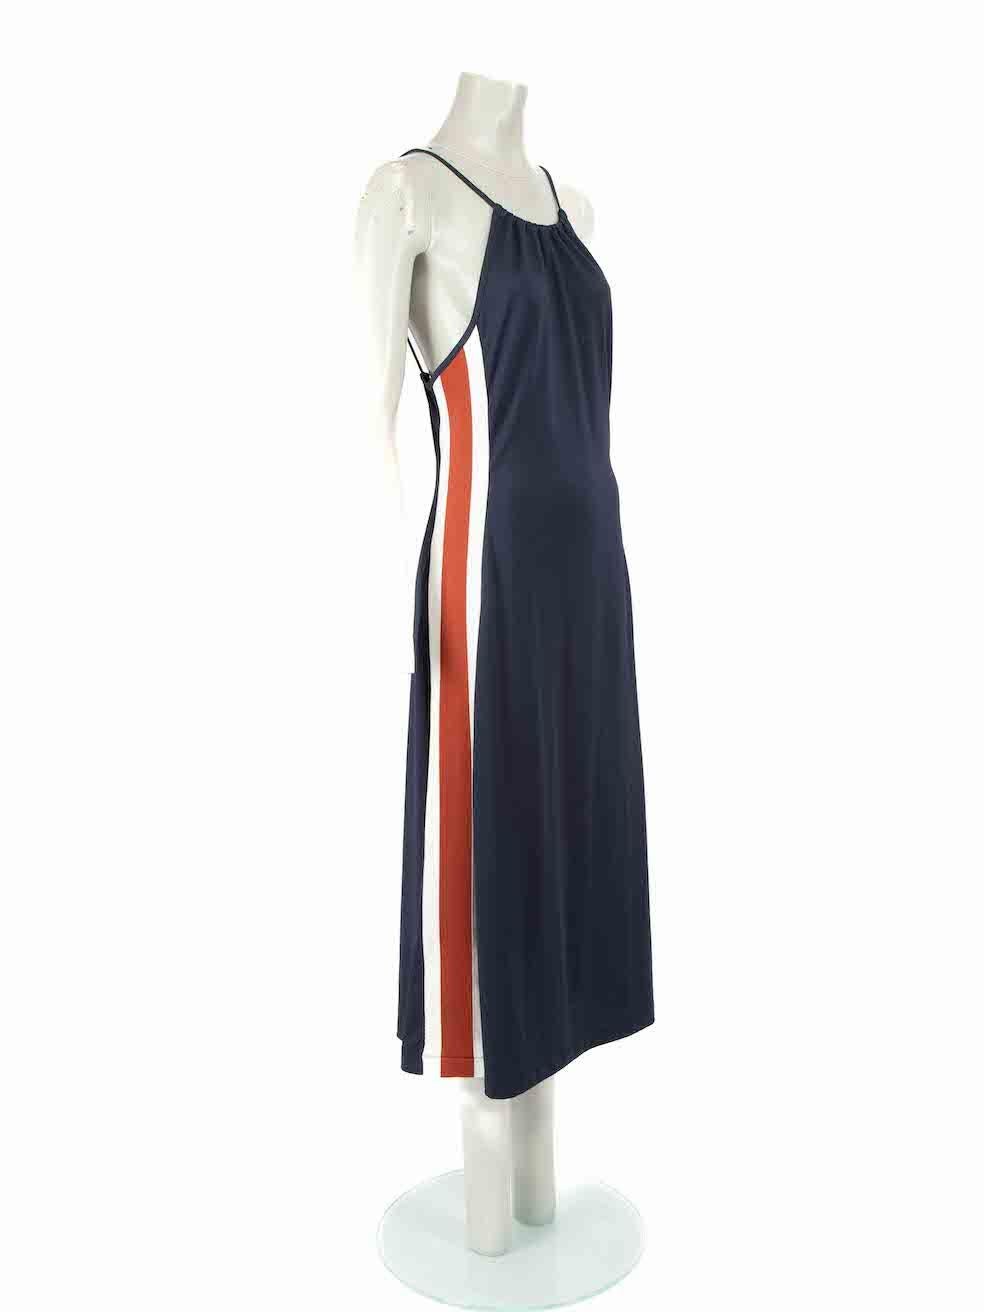 CONDITION is Very good. Hardly any visible wear to dress is evident on this used Ganni designer resale item.
 
 Details
 Navy
 Polyester
 Dress
 Midi
 Side tape detail
 Sleeveless
 Round neck
 Back zip and hook fastening
 
 
 Made in Portugal
 
